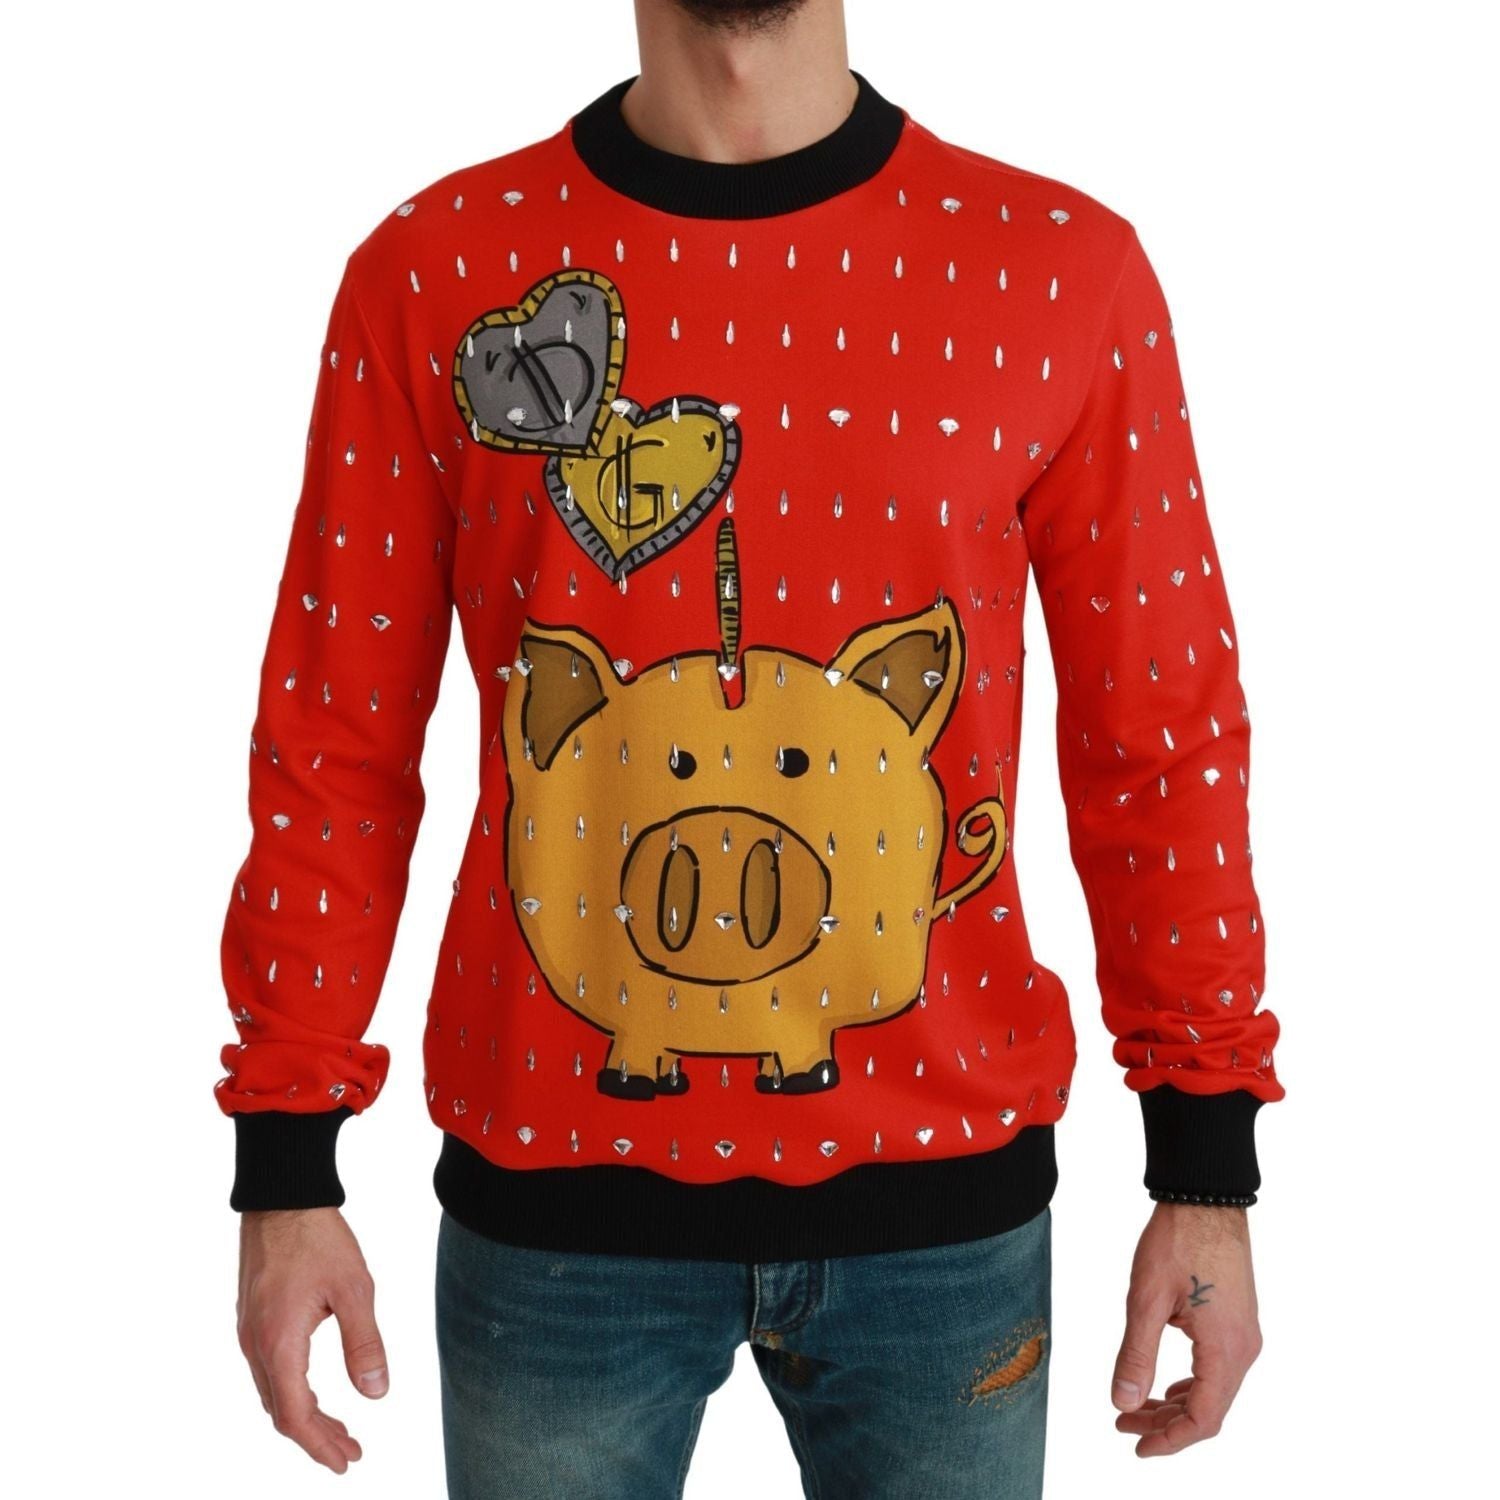 Dolce & Gabbana | Red Crystal Pig of the Year Sweater | McRichard Designer Brands